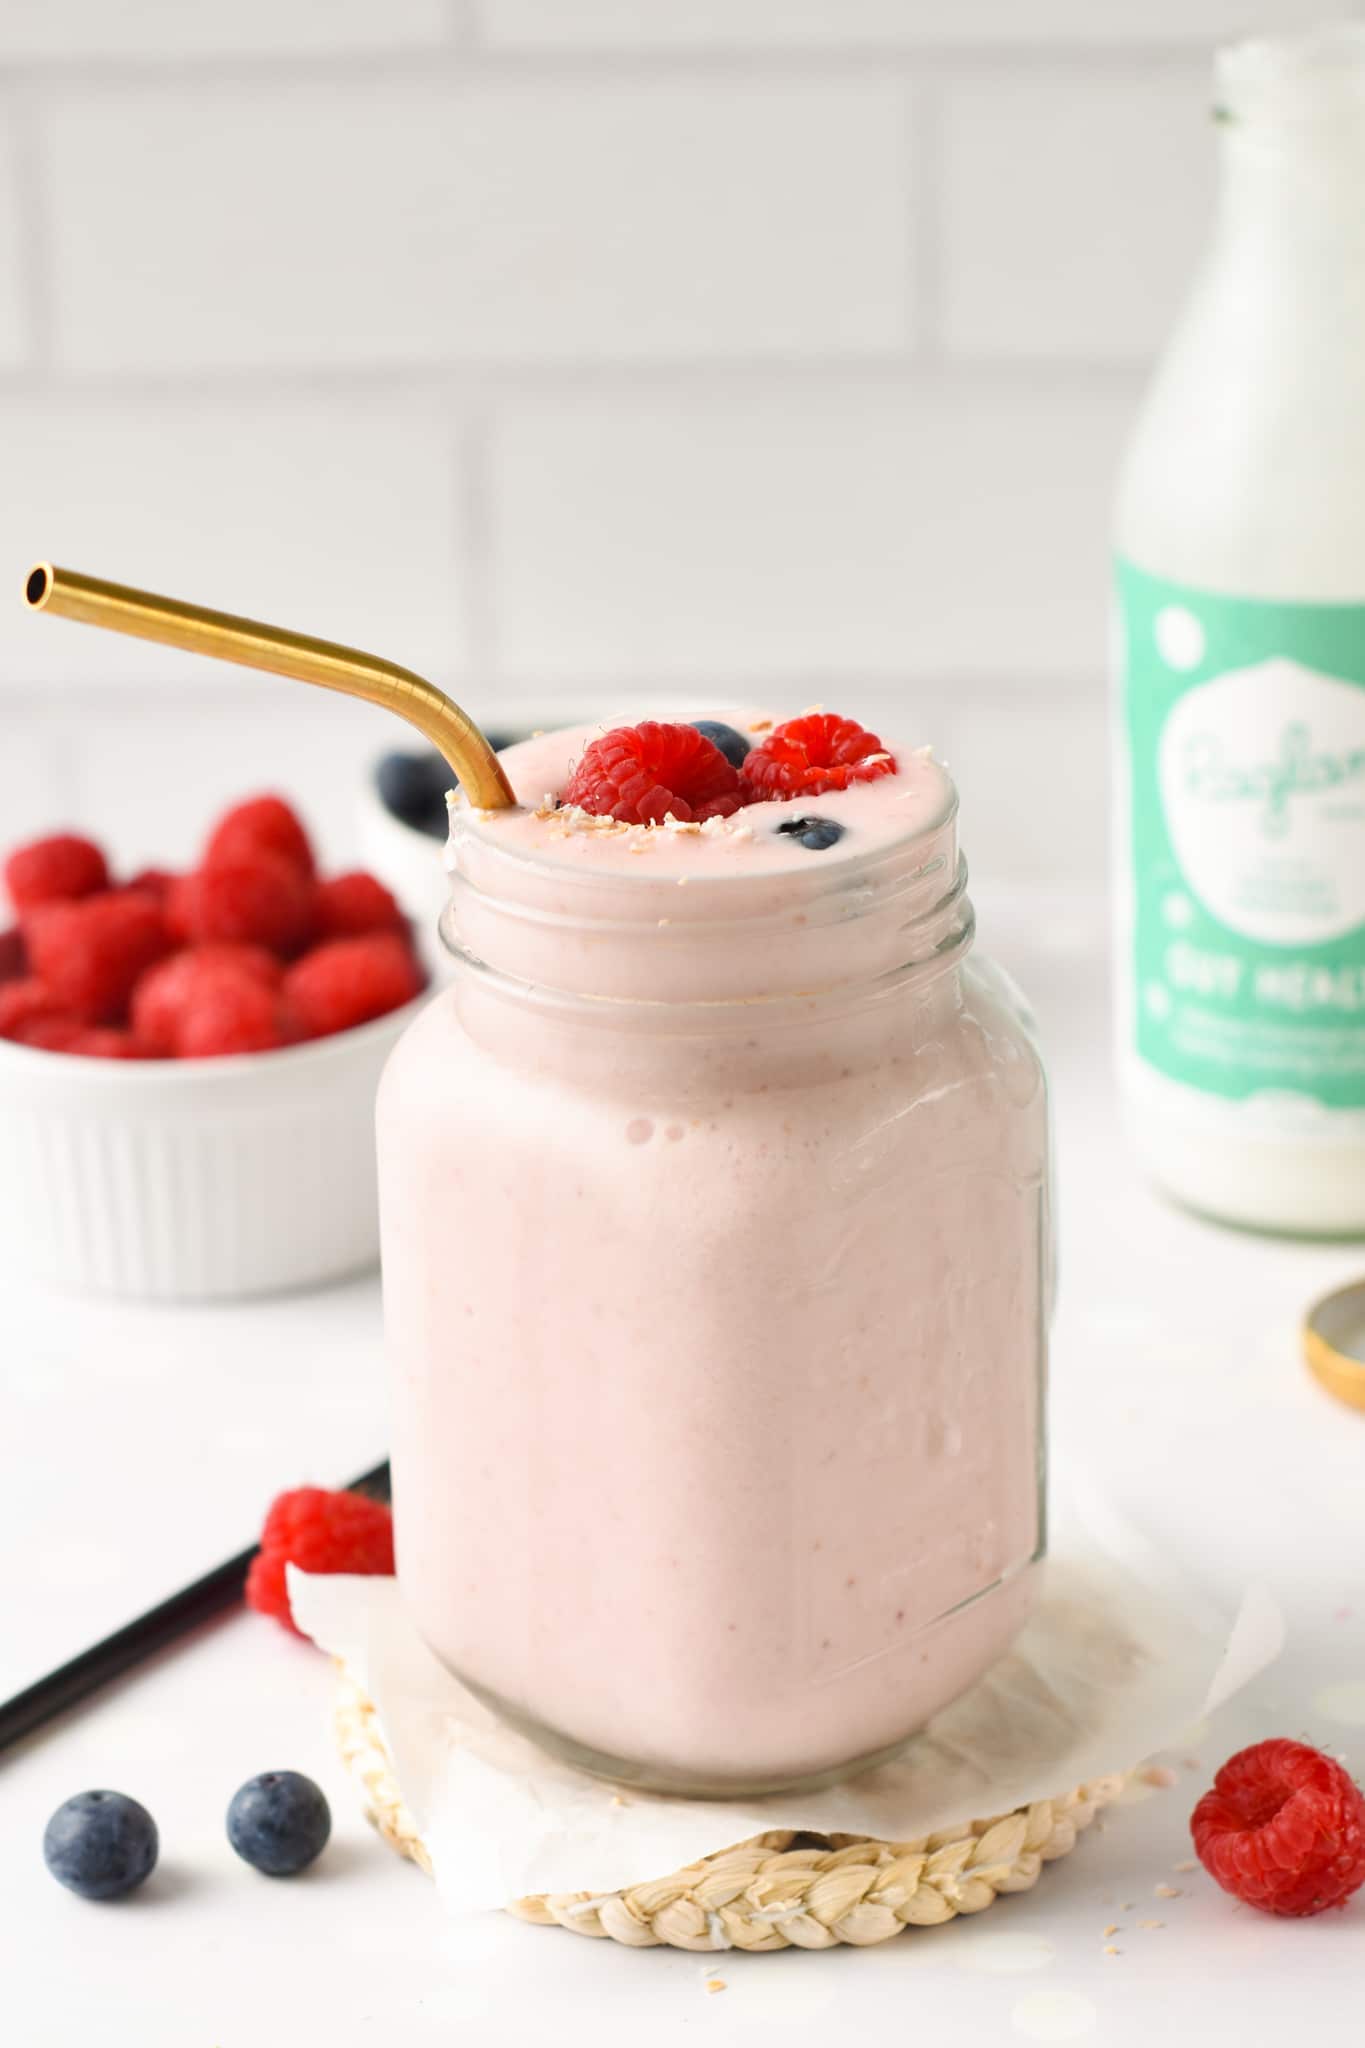 Kefir Smoothie in a large glass container decorated with raspberries and blueberries and with a golden spoon.